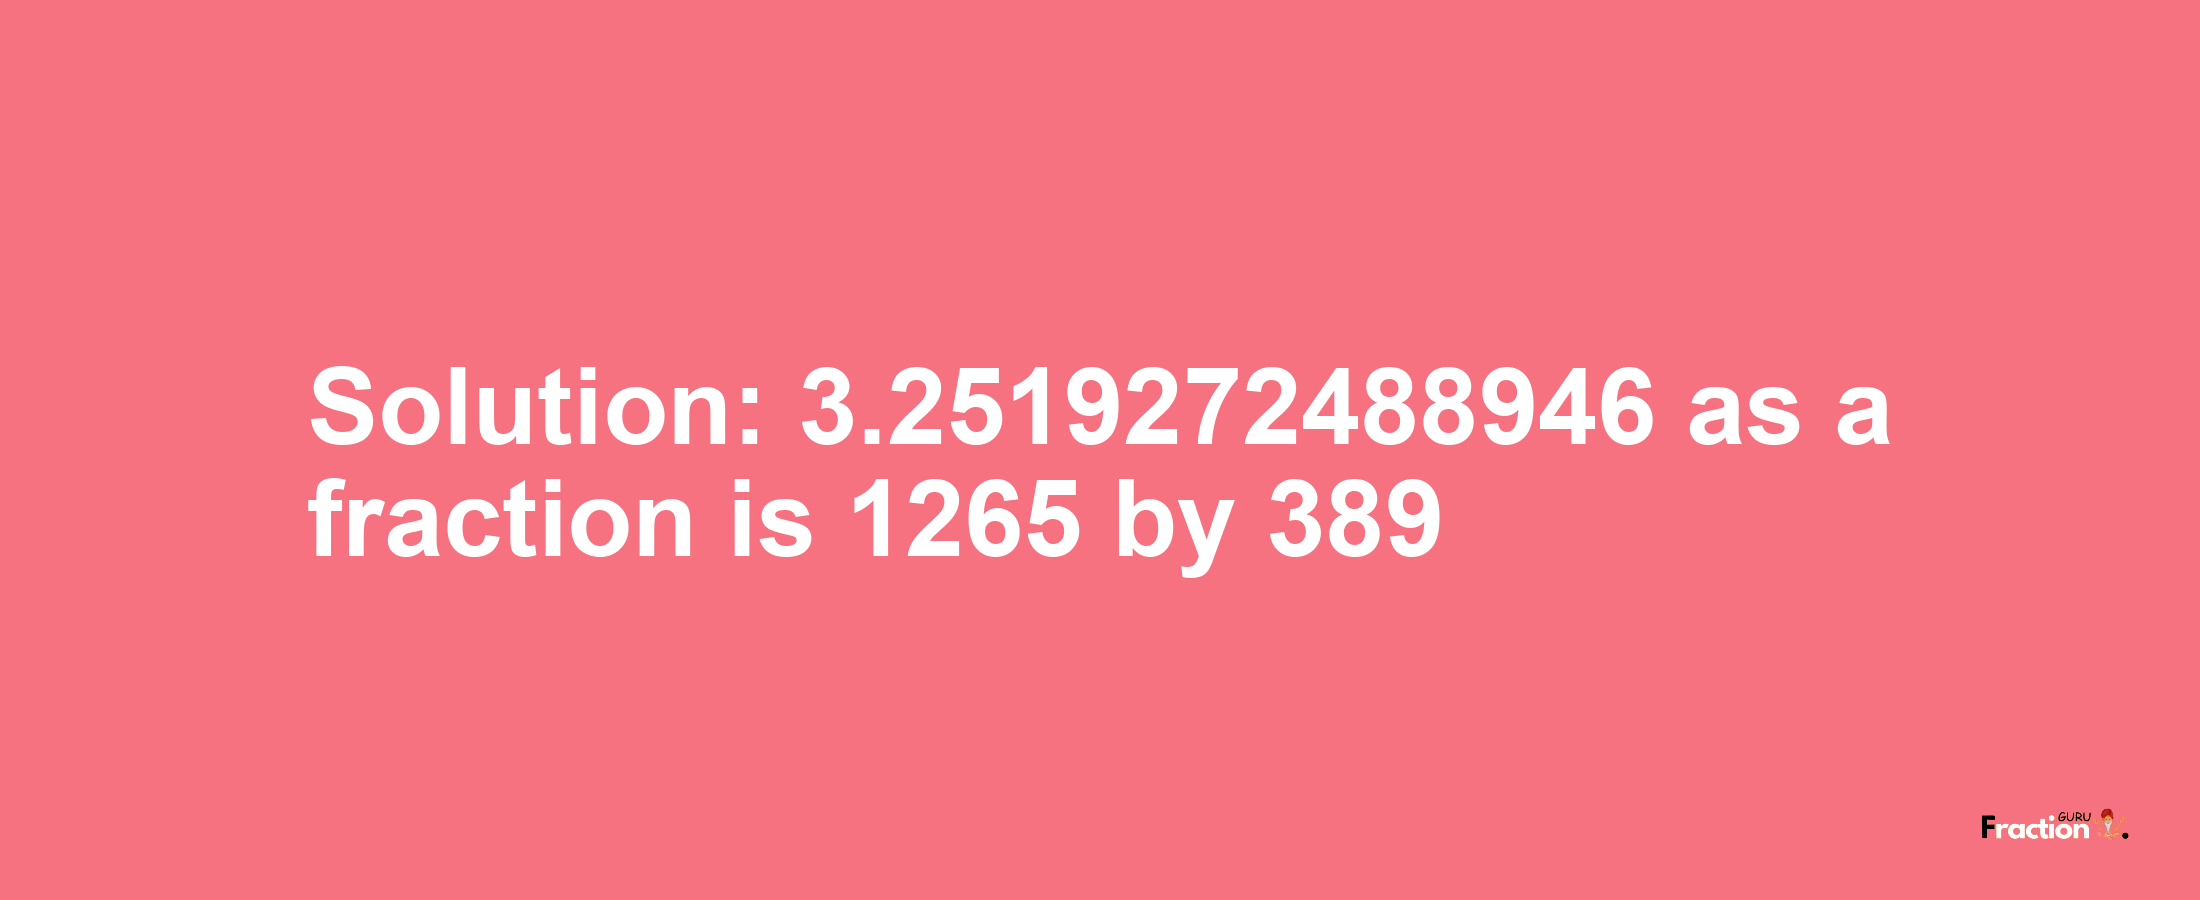 Solution:3.2519272488946 as a fraction is 1265/389